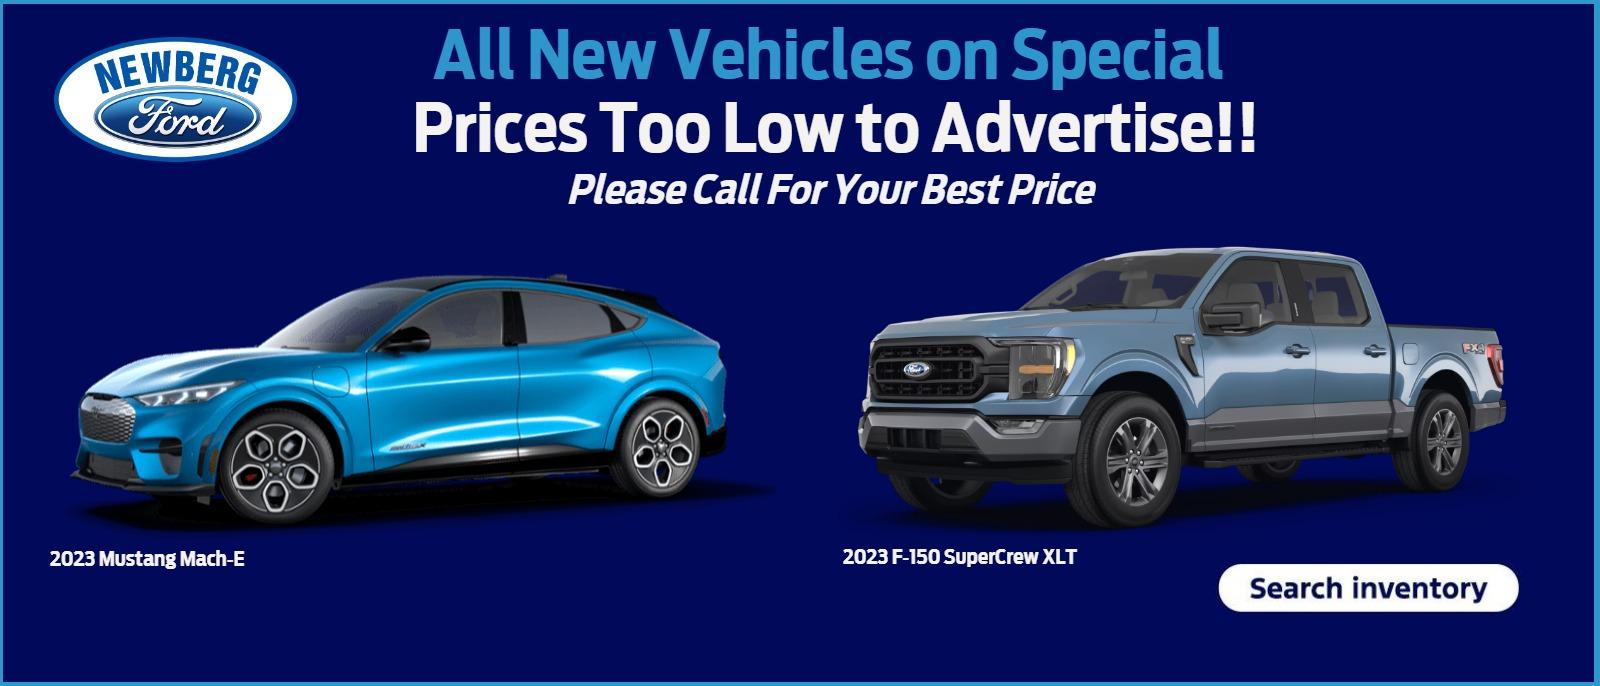 MAKE THE HOLIDAYS BRIGHT SALES EVENT - ALL NEW VEHICLES ON SPECIAL AT NEWBERG FORD IN NEWBERG, OR